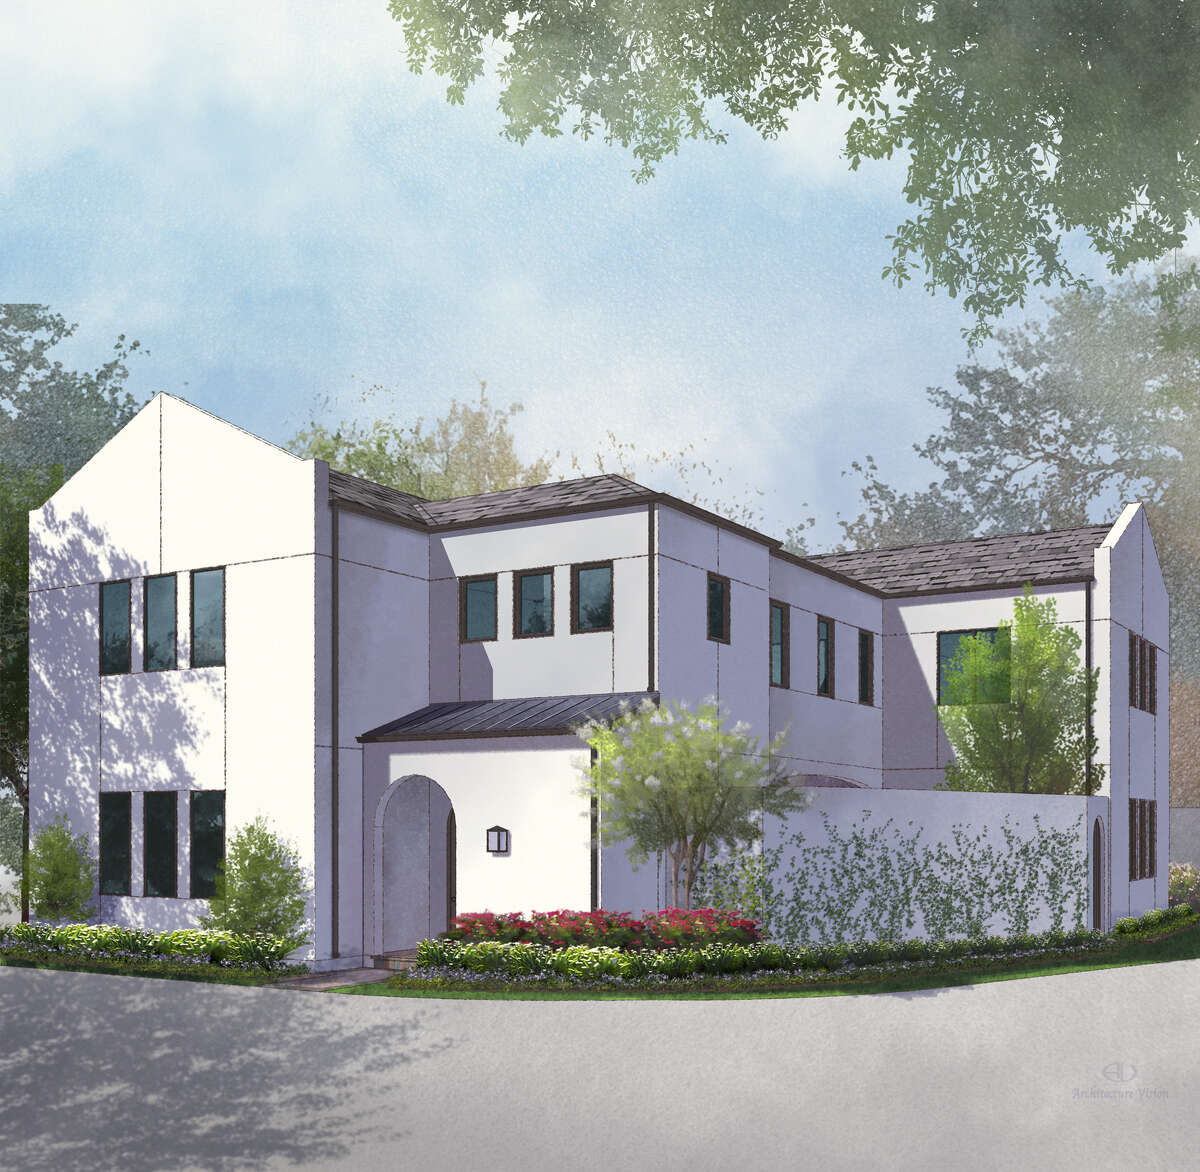 Maravilla Court, to be at Wirt and Long Point, will have 28 patio homes that start in the $700,000s.